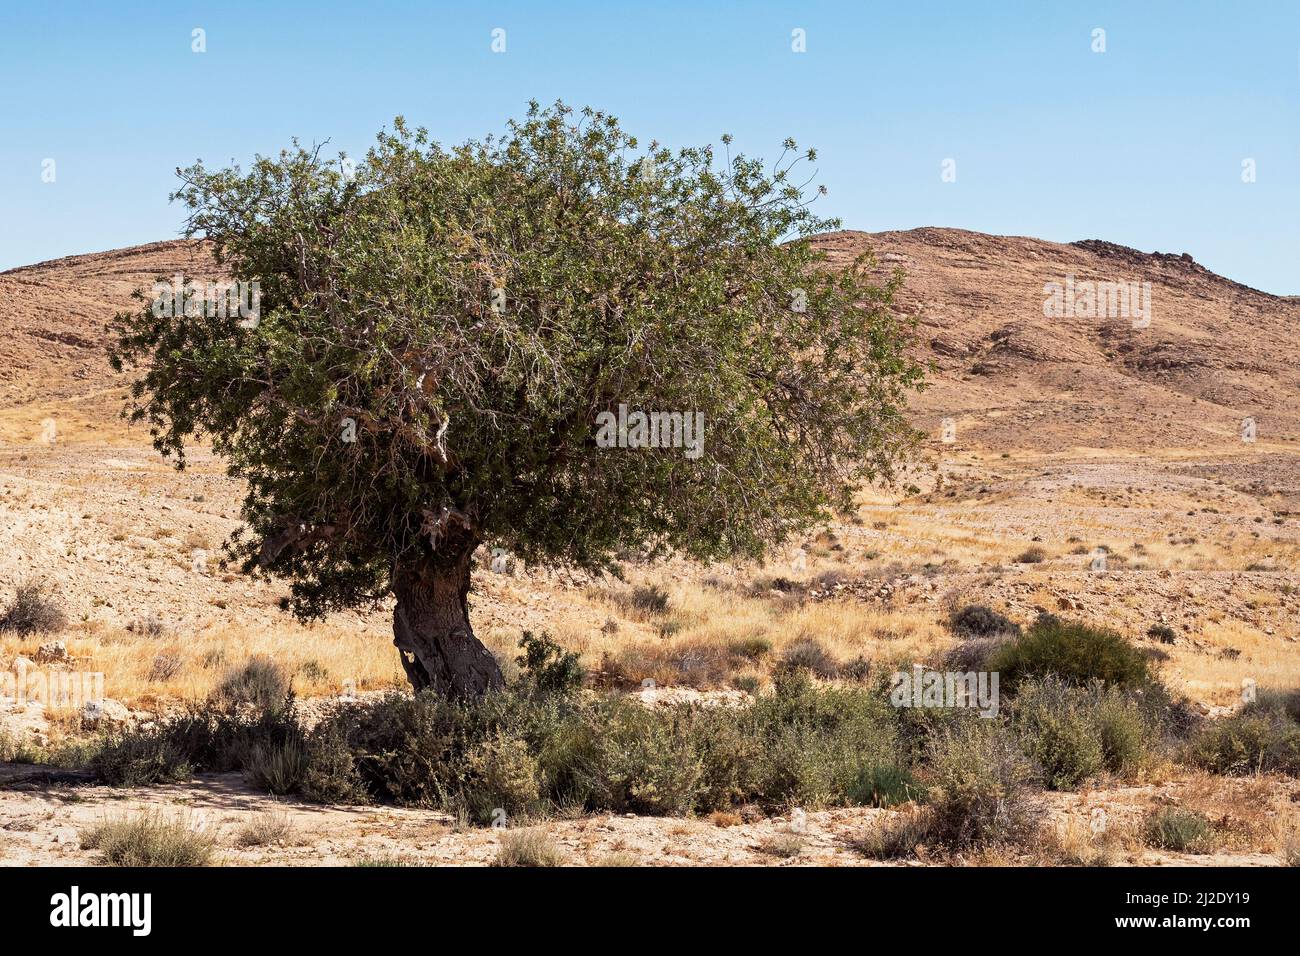 Atlantic pistachio Pistacia atlantica tree in a dry stream bed in the Negev Highlands mountains near the Makhtesh Ramon crater in Israel with a clear Stock Photo